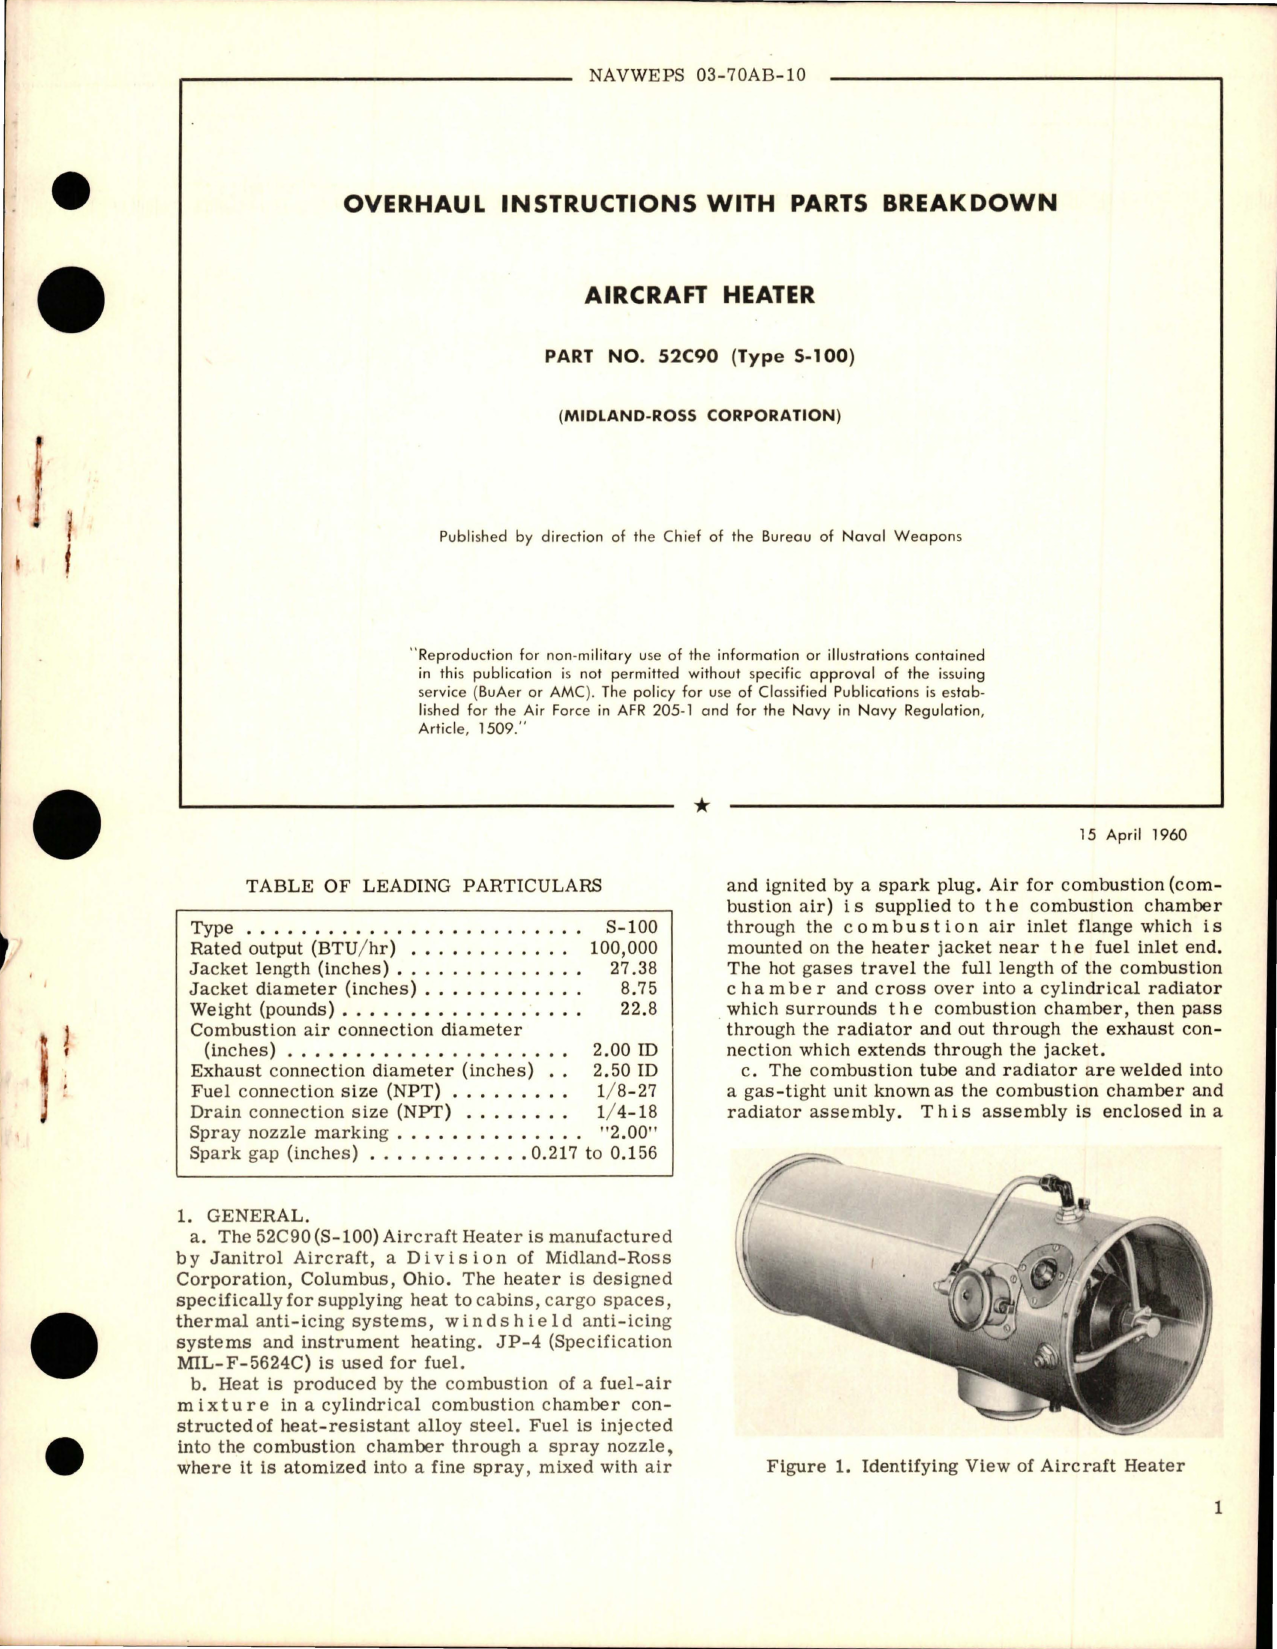 Sample page 1 from AirCorps Library document: Overhaul Instructions w Parts Breakdown for Aircraft Heaters - Part 52C90 - Type S-100 